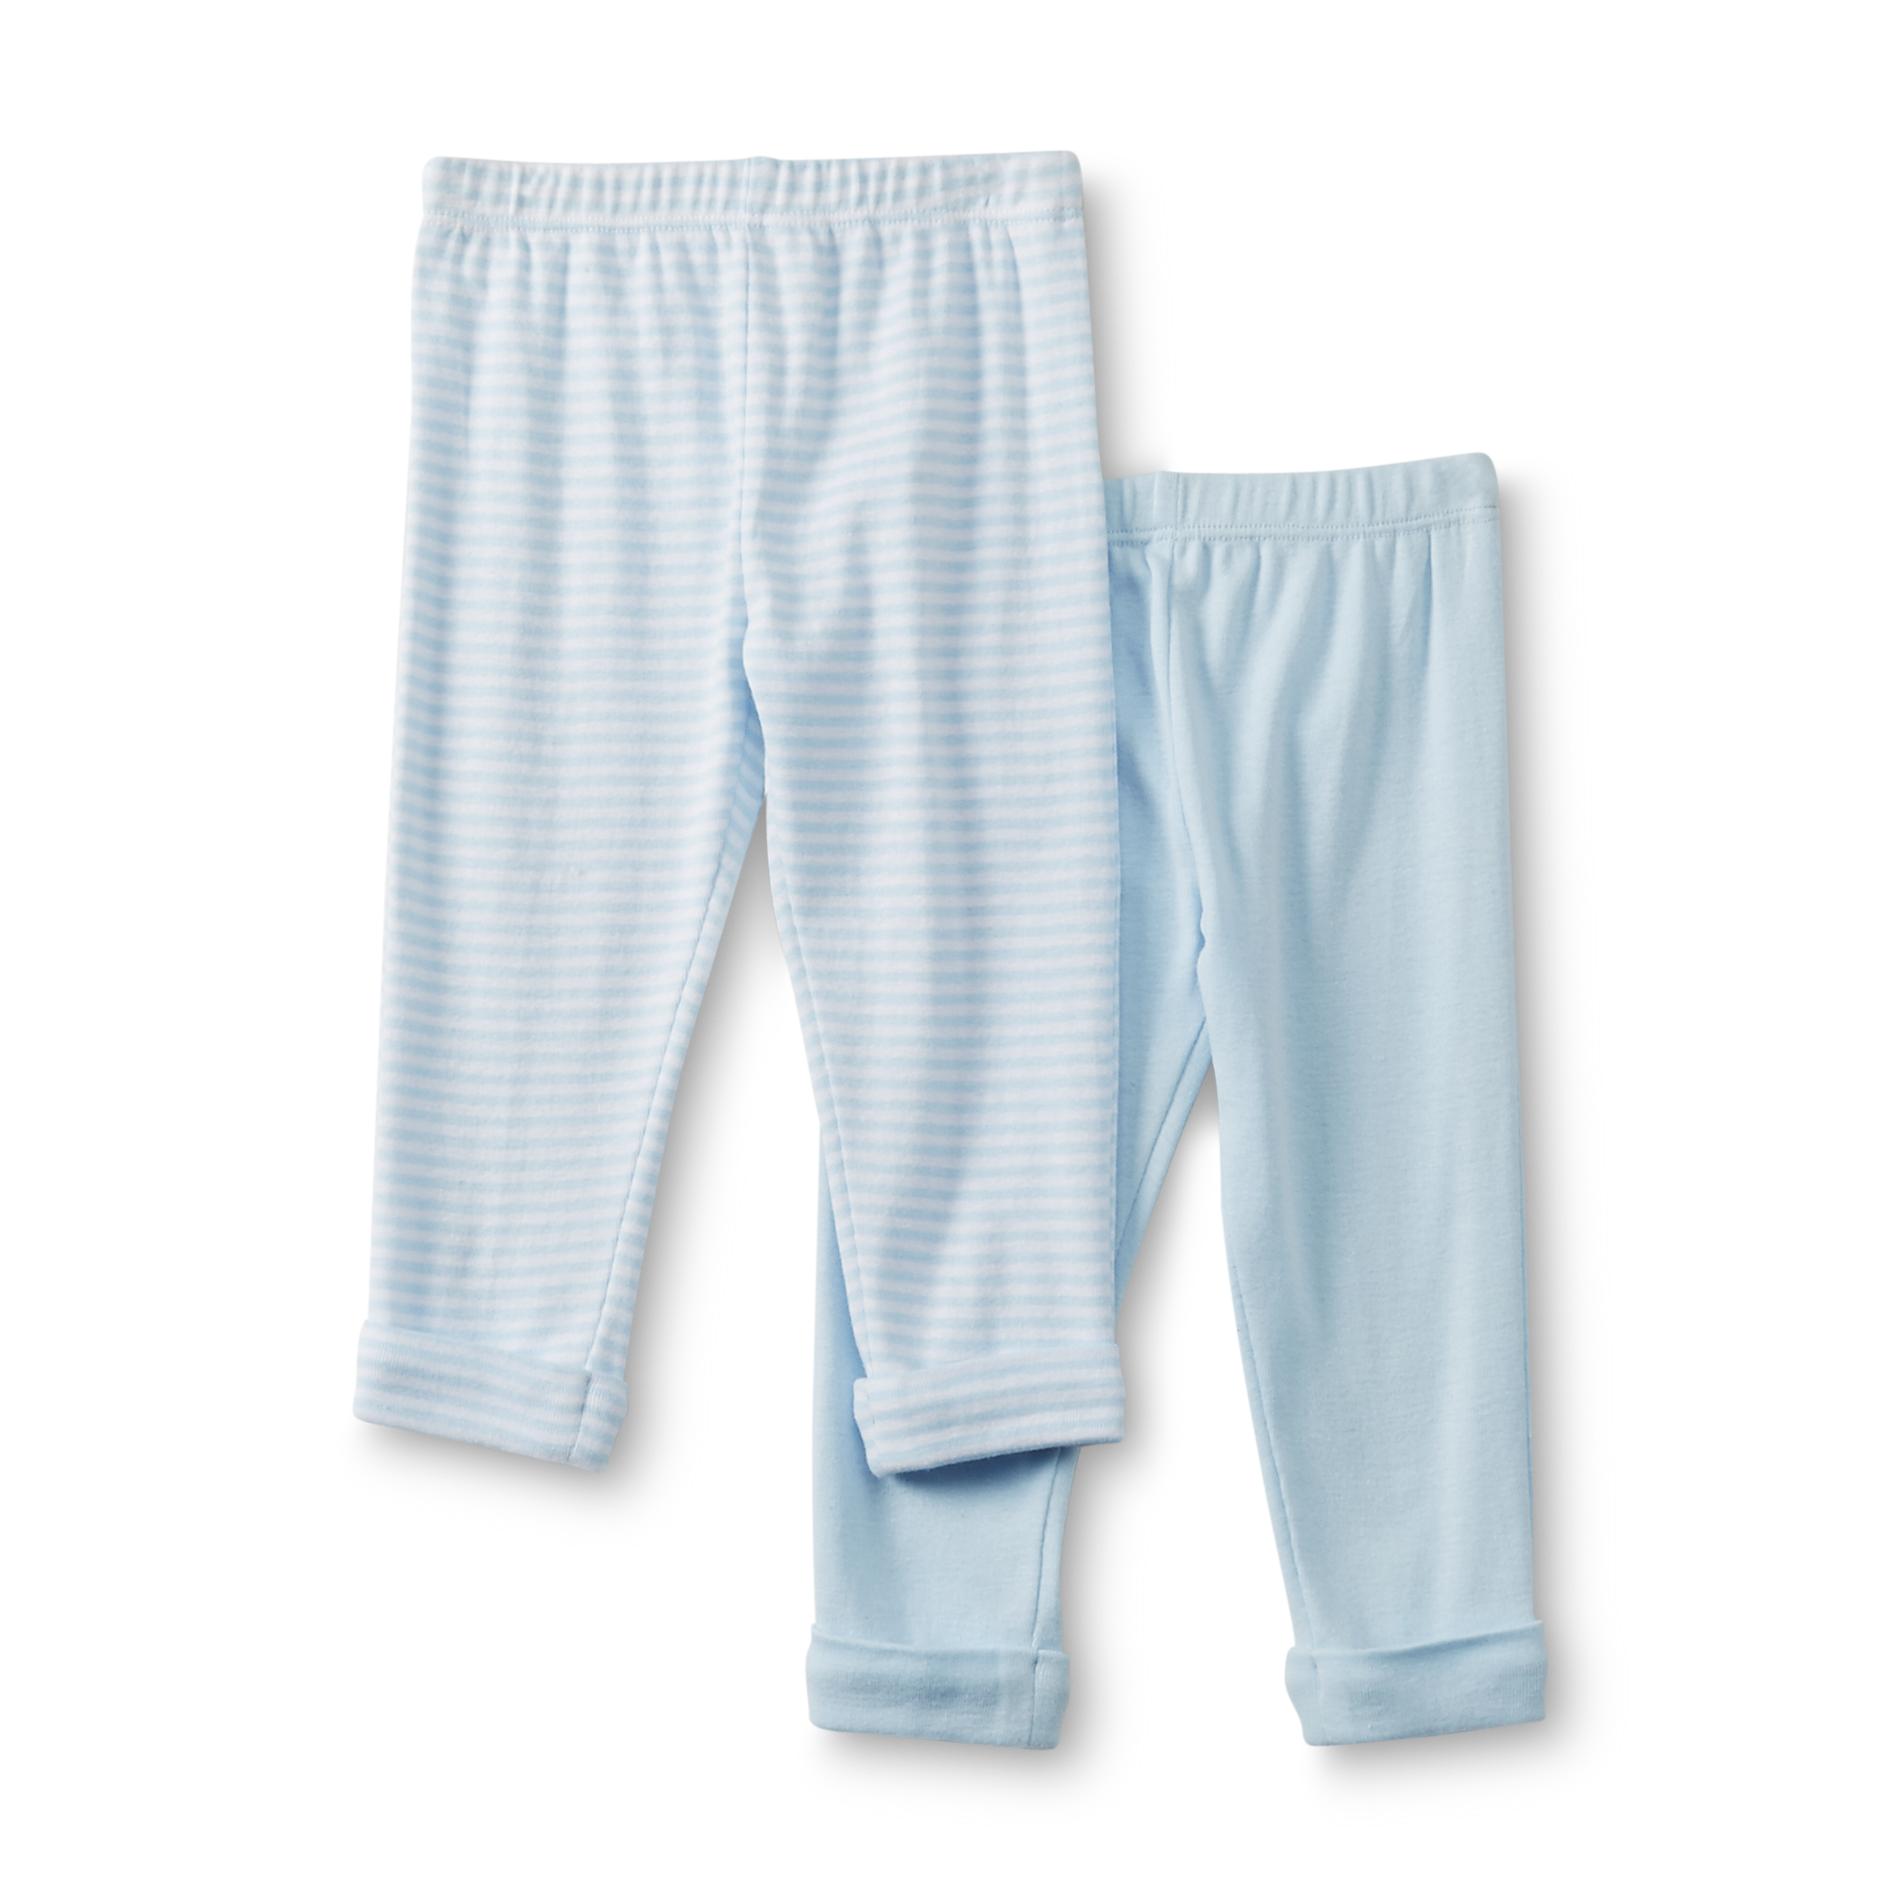 Welcome to the World Newborn Boy's 2-Pack Knit Pants - Striped